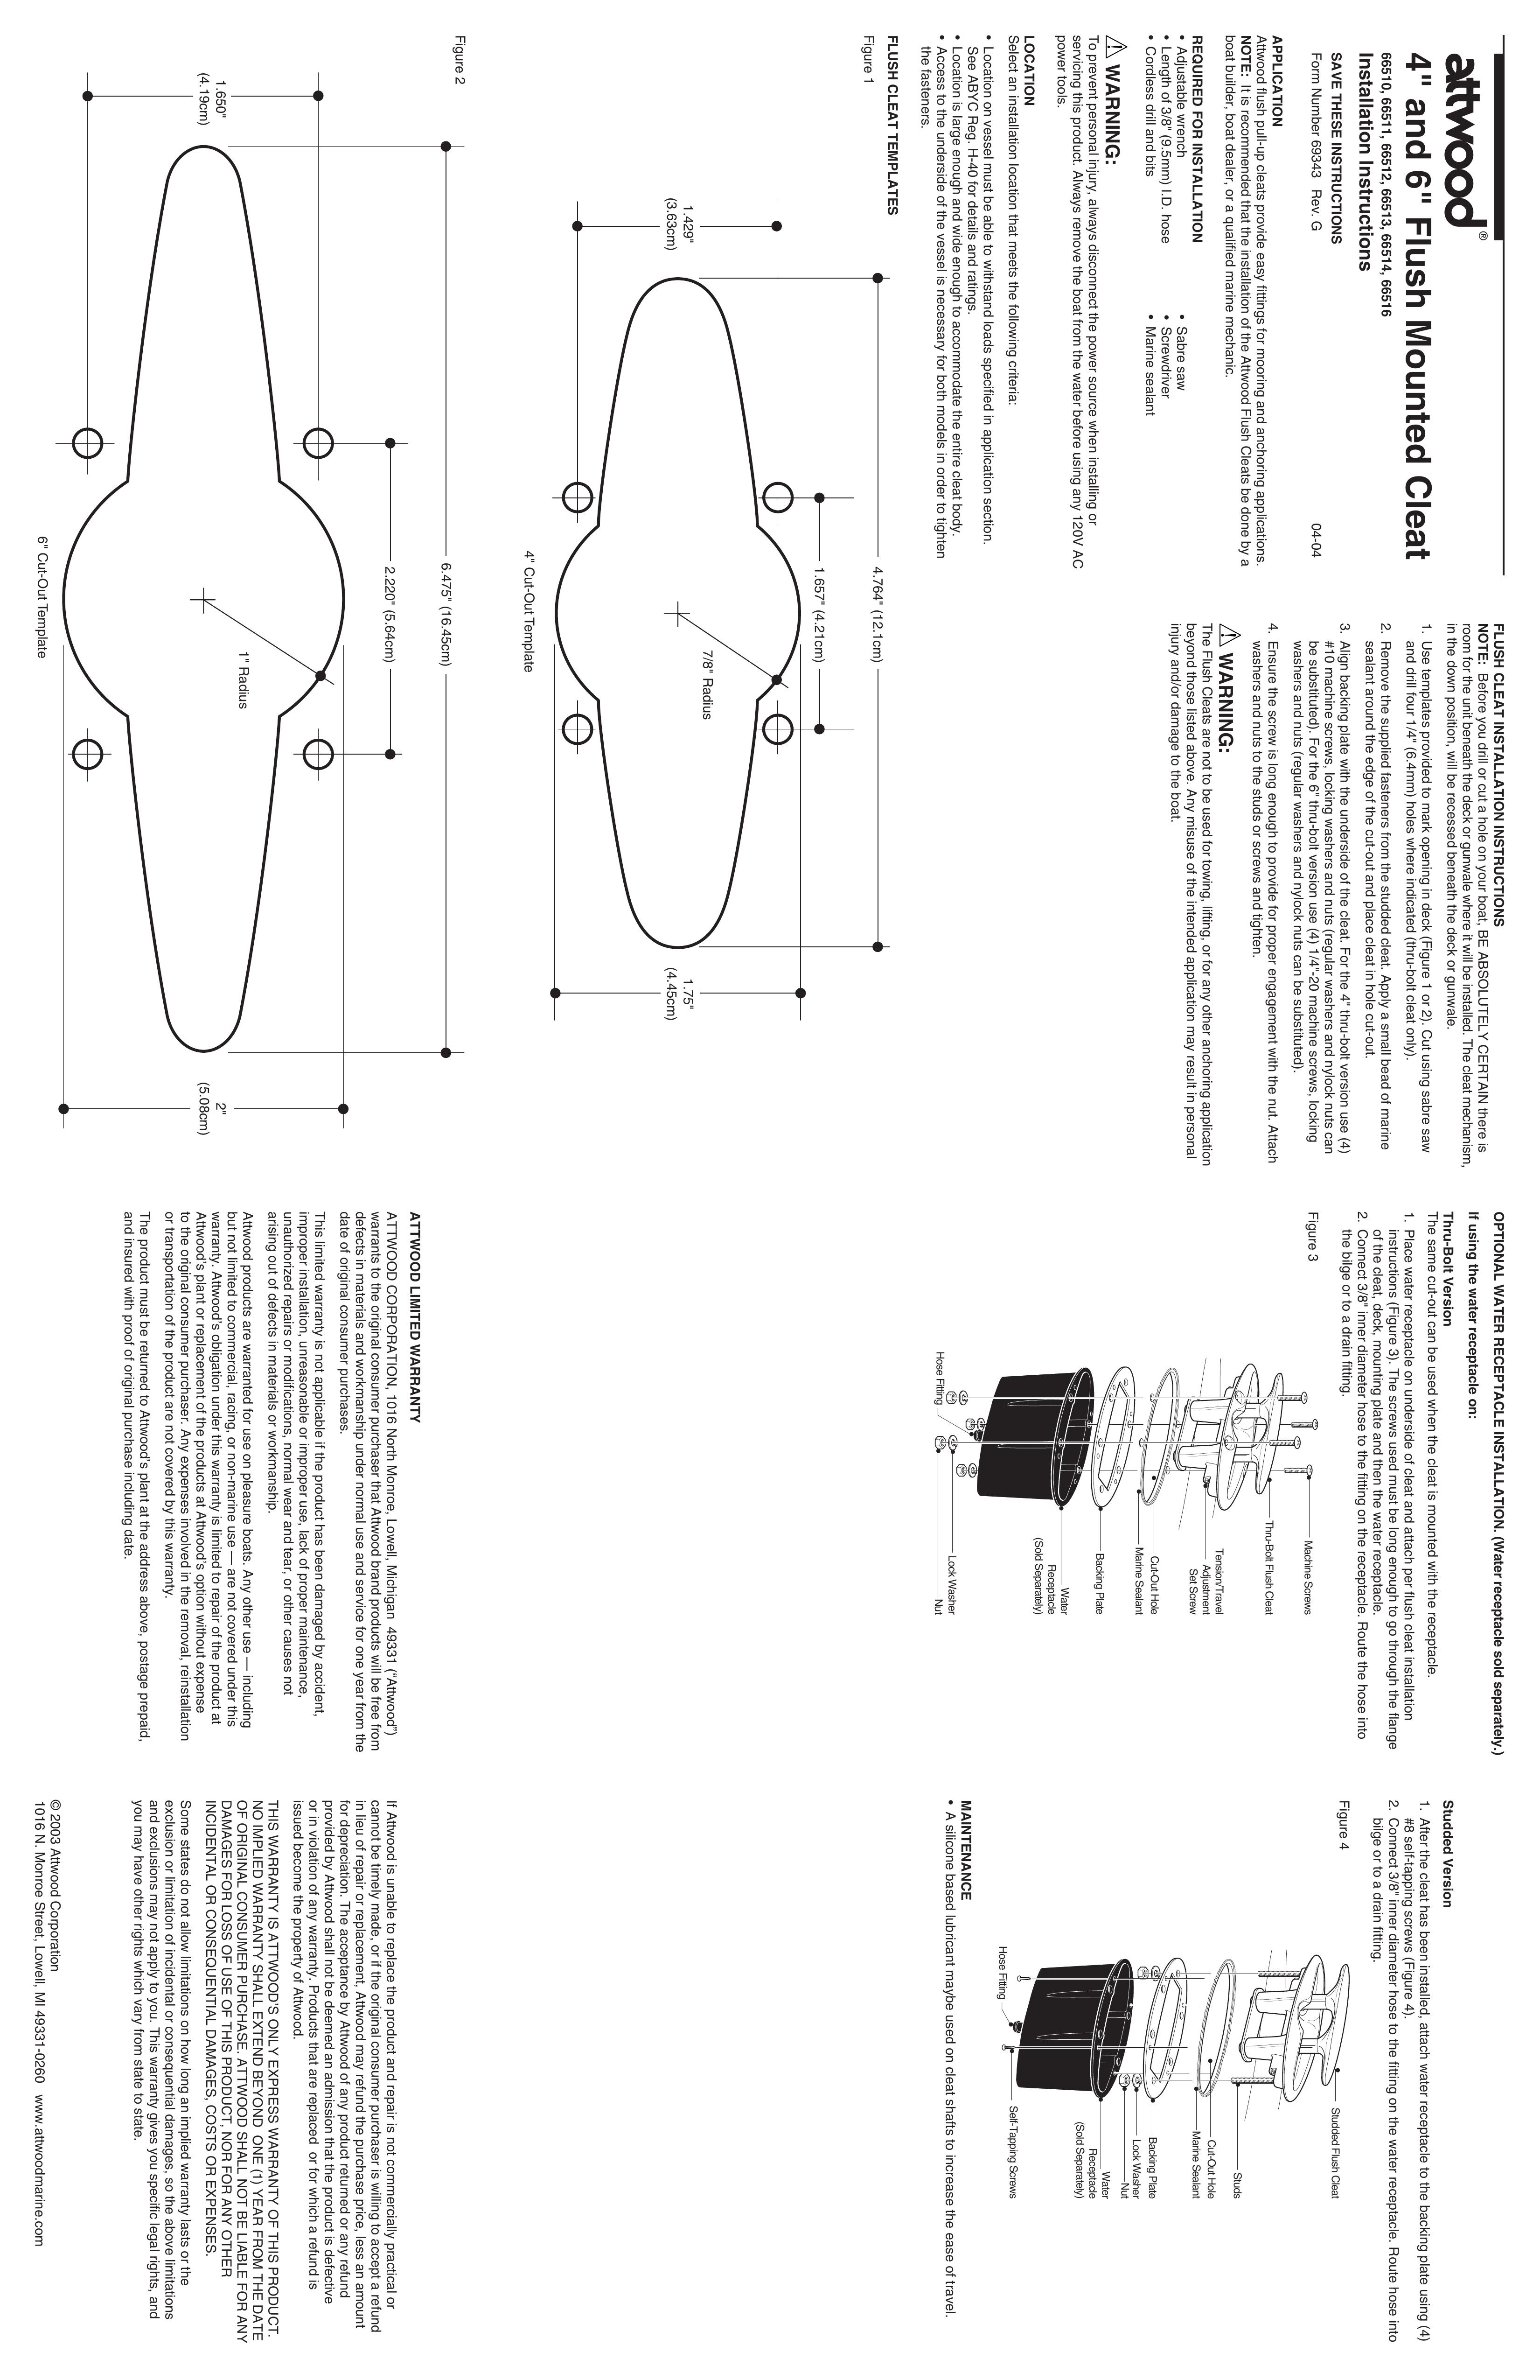 Attwood 66511 Boating Equipment User Manual (Page 1)